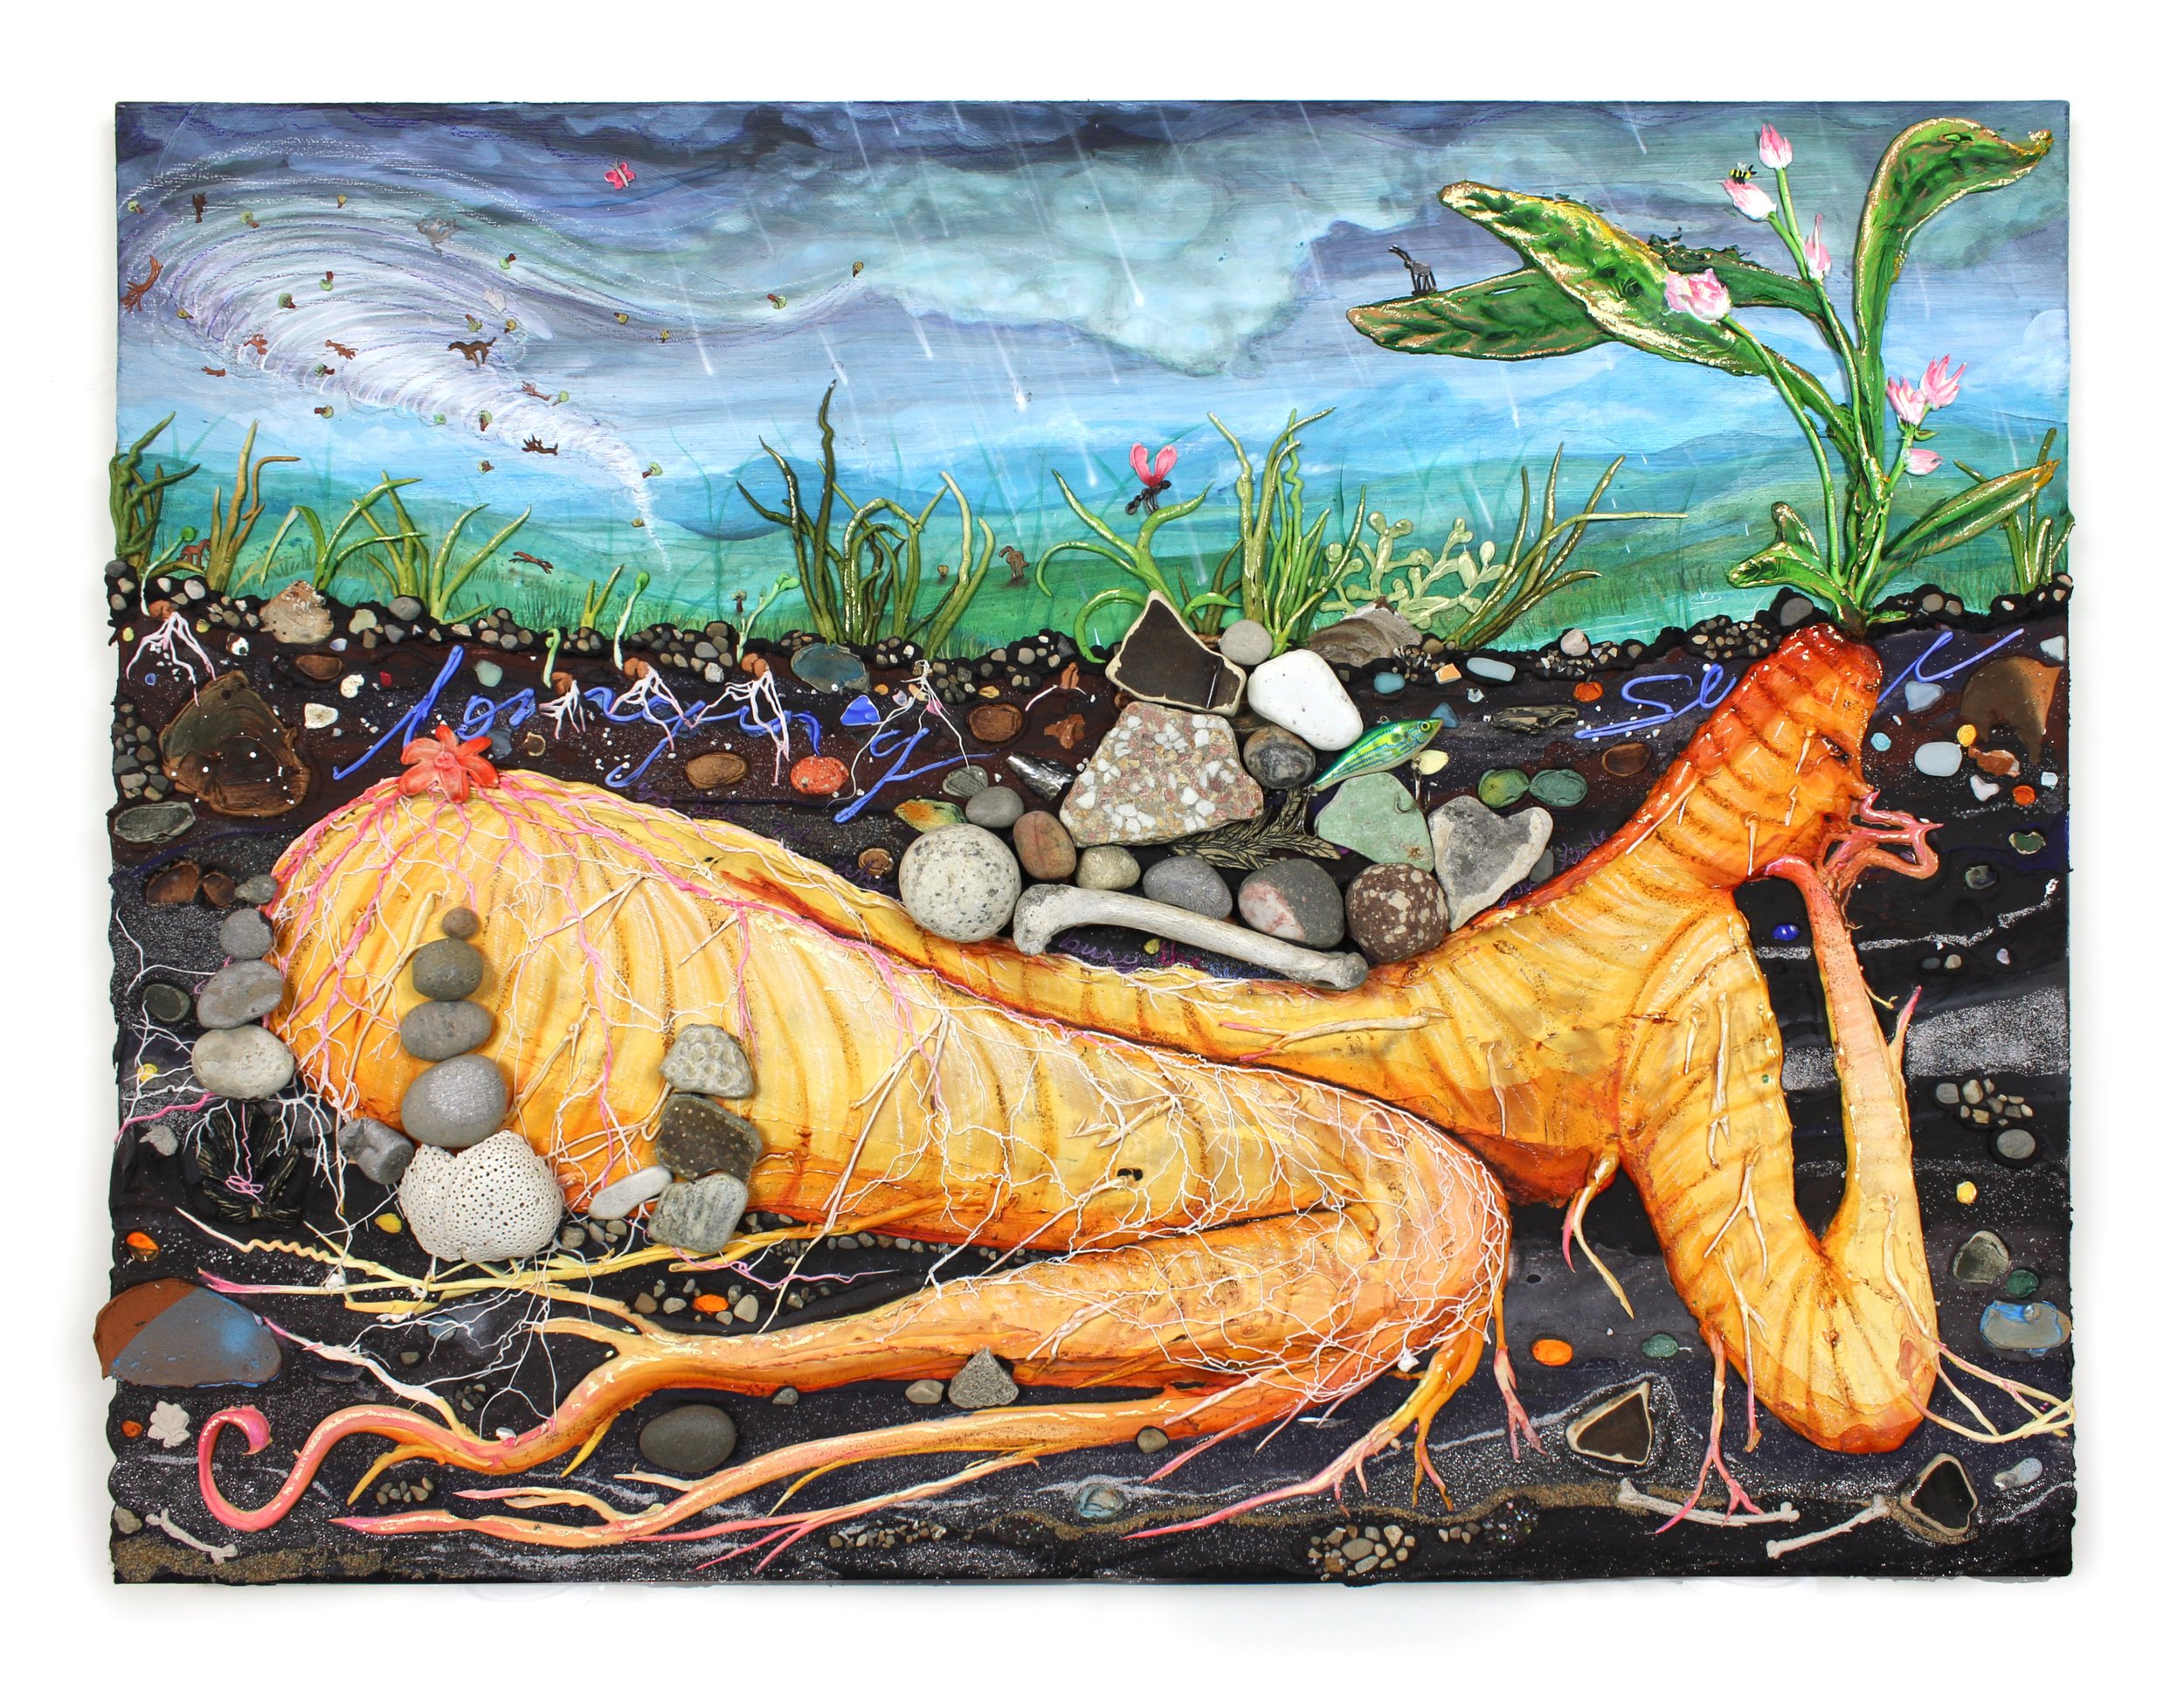   Inclement Weather , 2021. Acrylic, pigment, flash, watercolor, sand, pumice, mica, garnet, rocks, fossils and found objects from Lake Michigan, found bone, ceramic, shells, my grandfather’s fishing lure, glass, and oil stick on canvas, 40.5 x 30.25